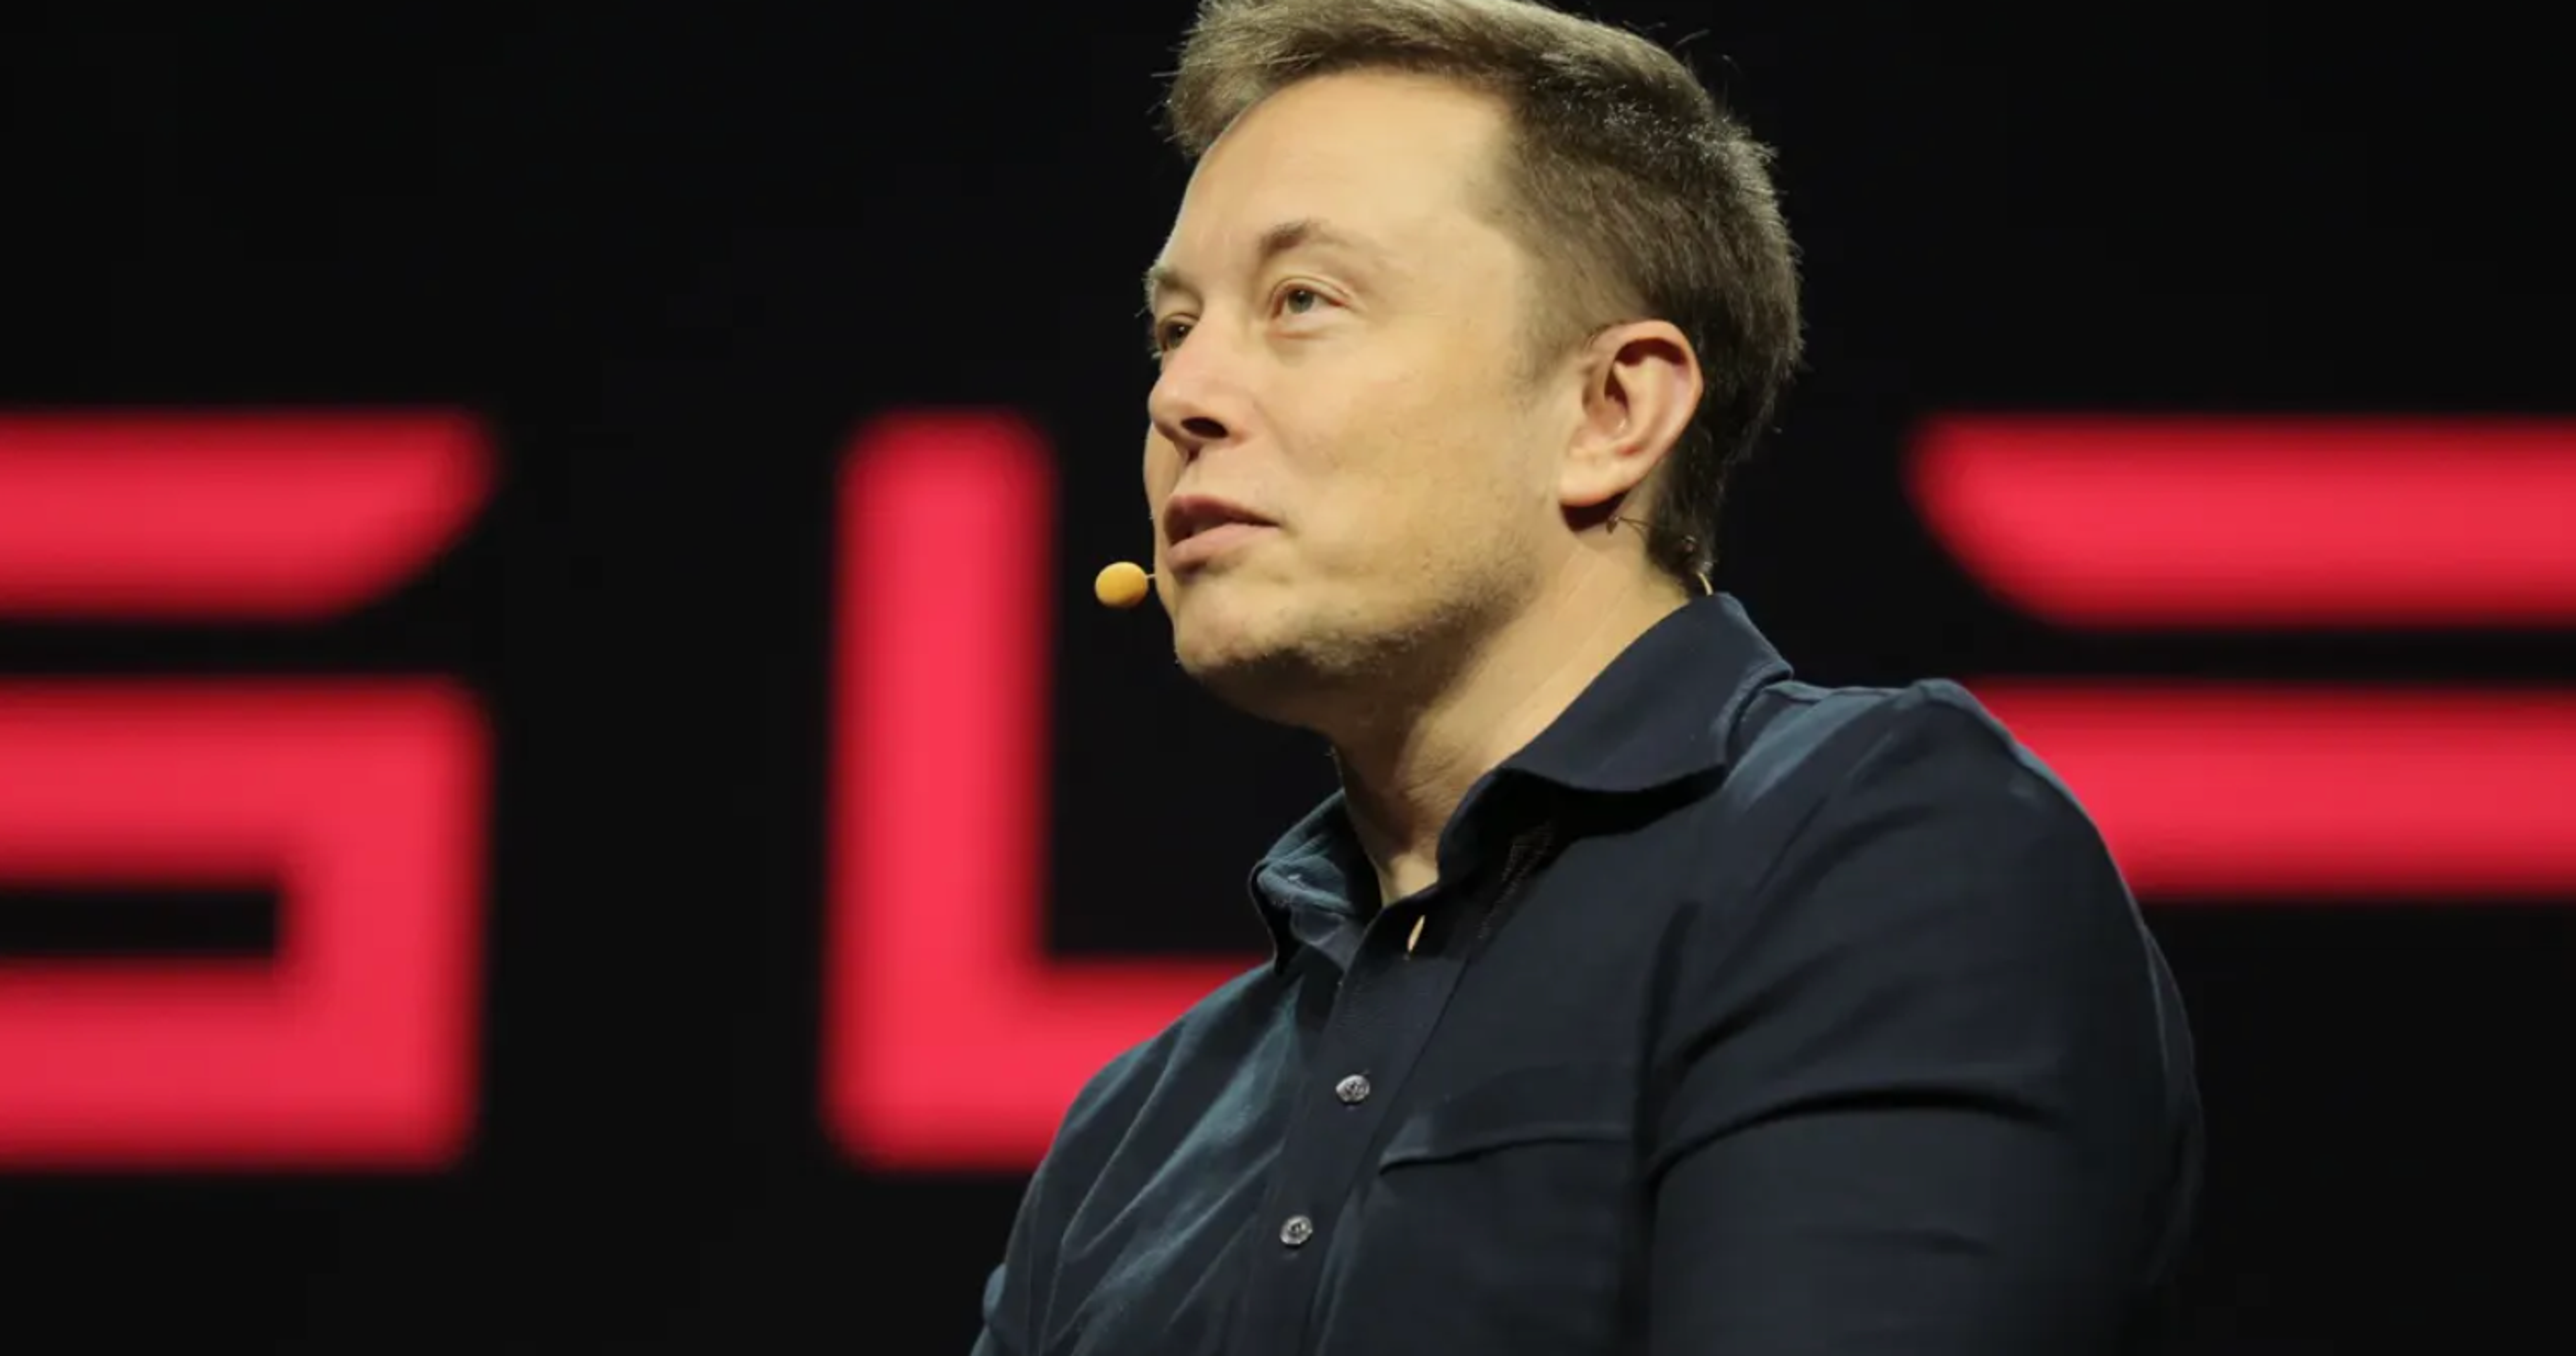 World&#39;s Richest Man Is Homeless? Yes, Elon Musk Says He&#39;s Sleeping At Friends&#39; Houses